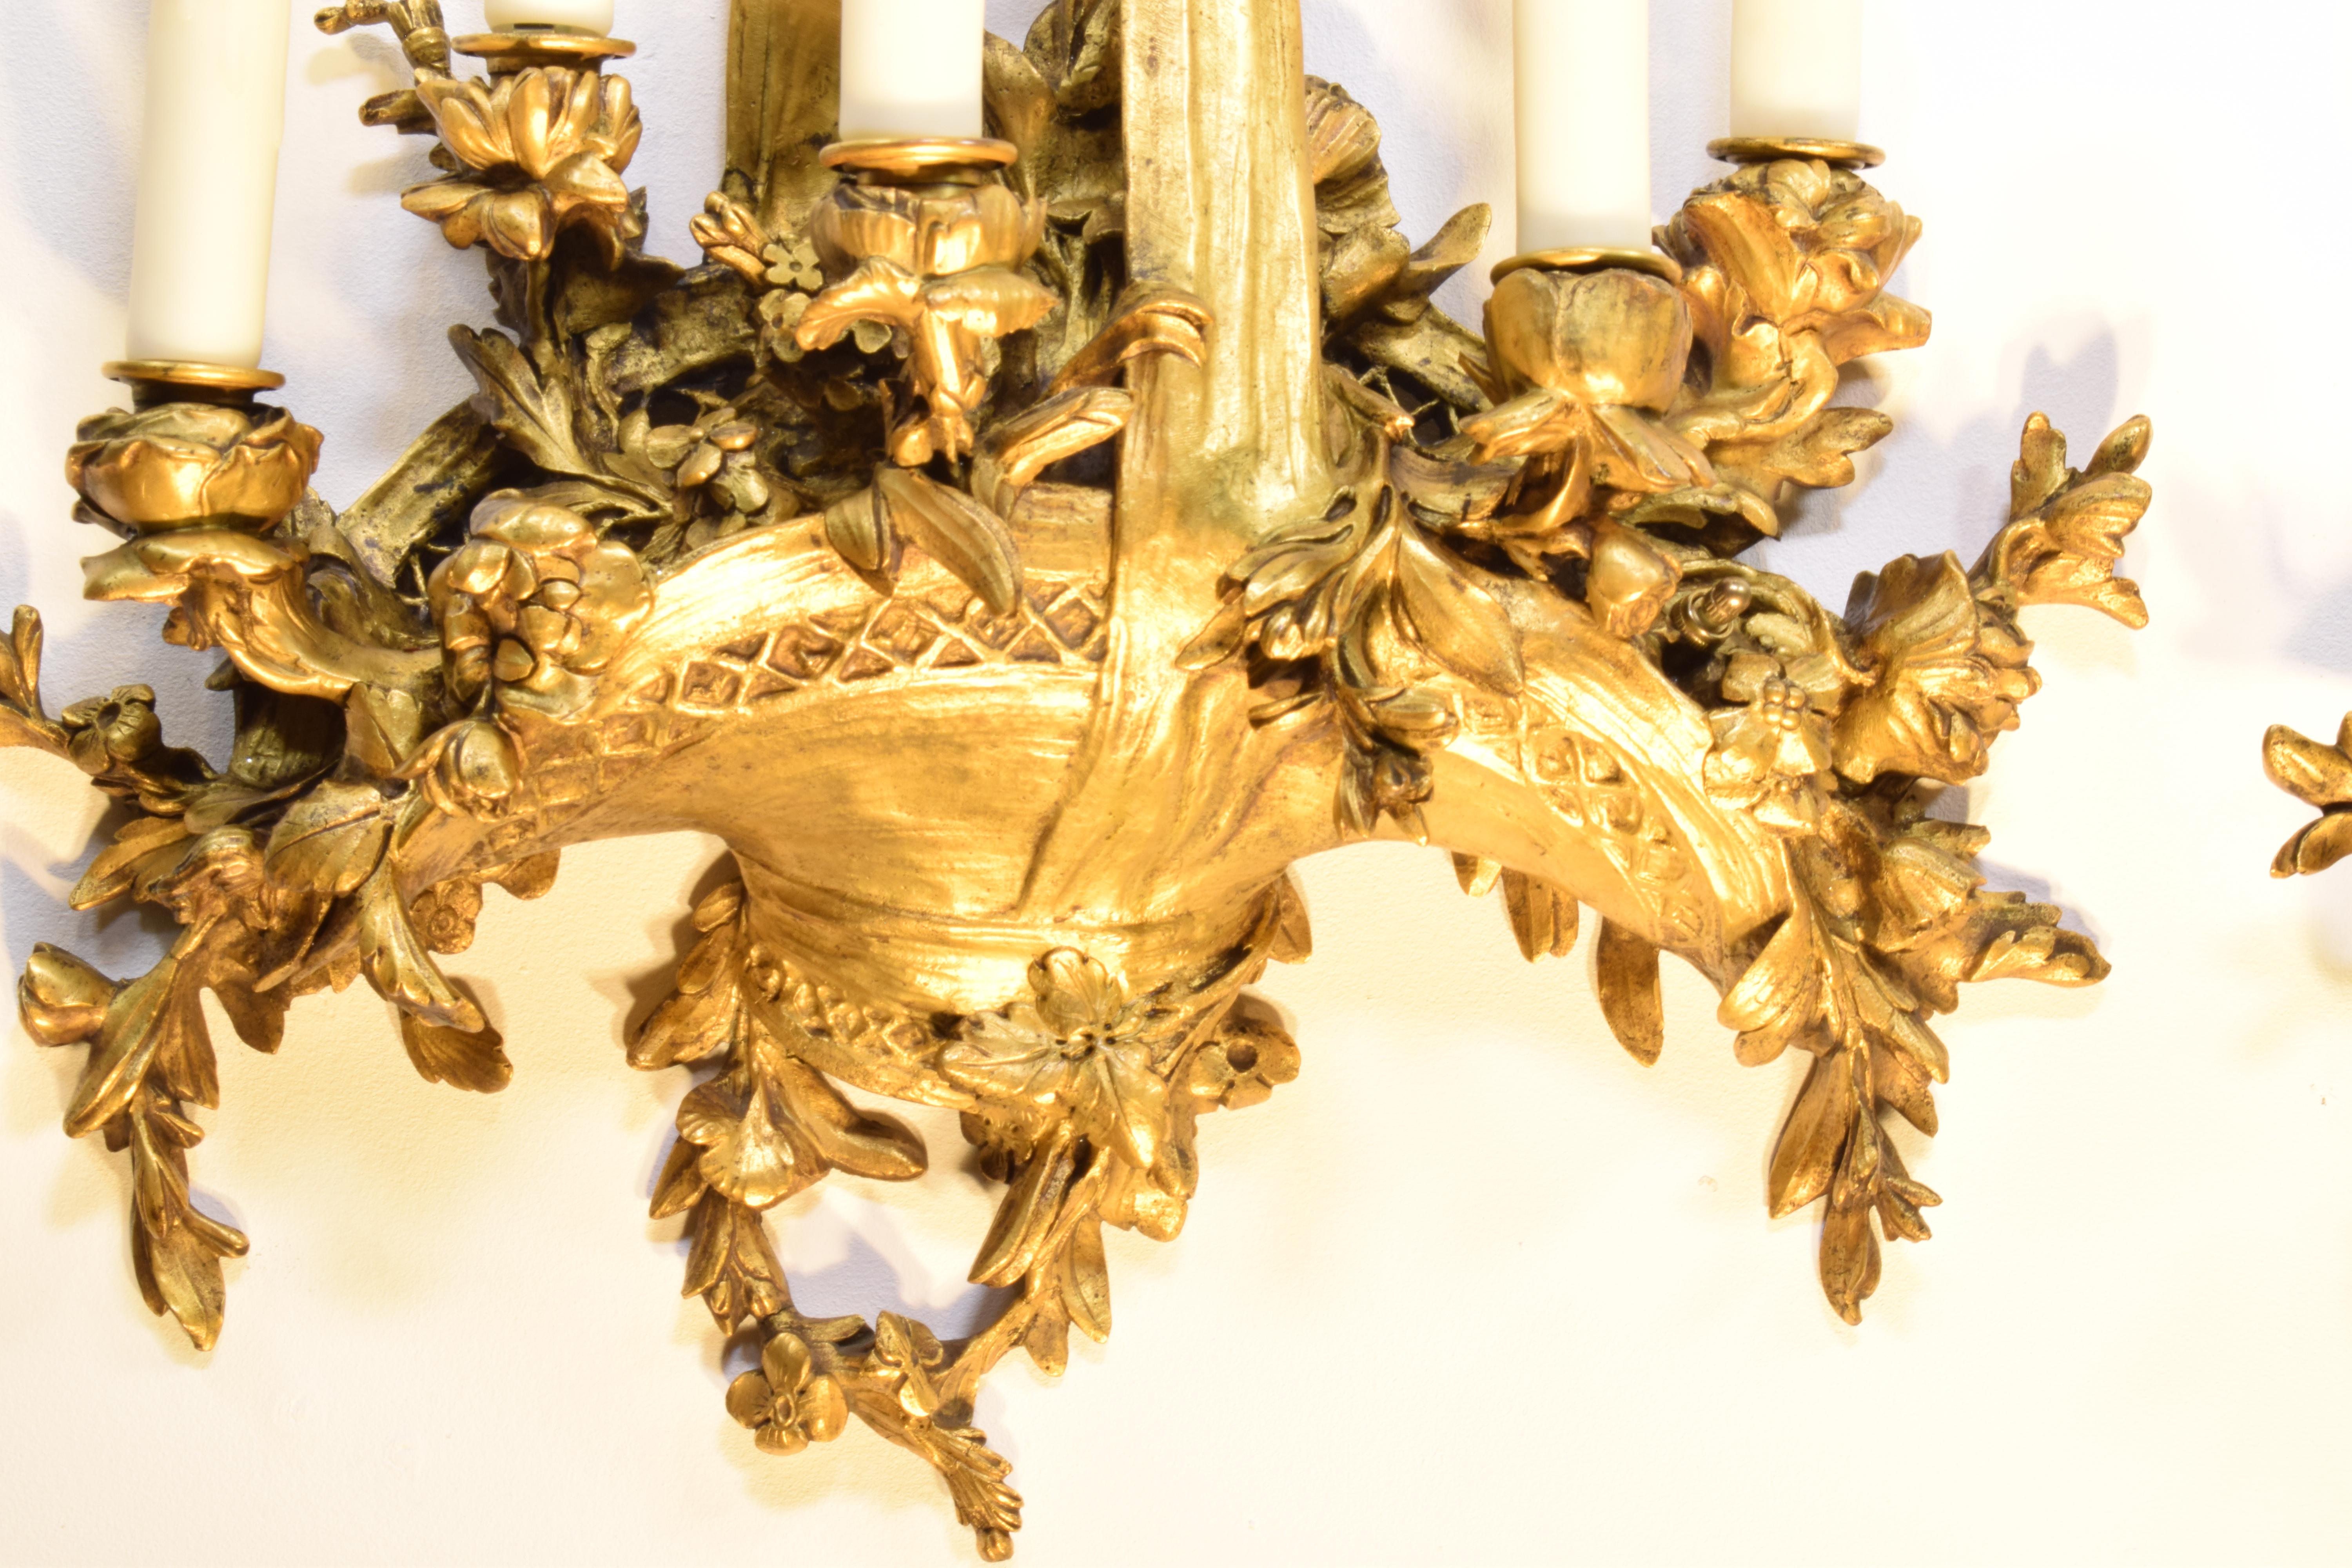 An Extraordinary Pair of Gilt Bronze Wall Sconces. Great Quality. 
5 lights each. France, circa 1920. 
Dimensions: Height 38